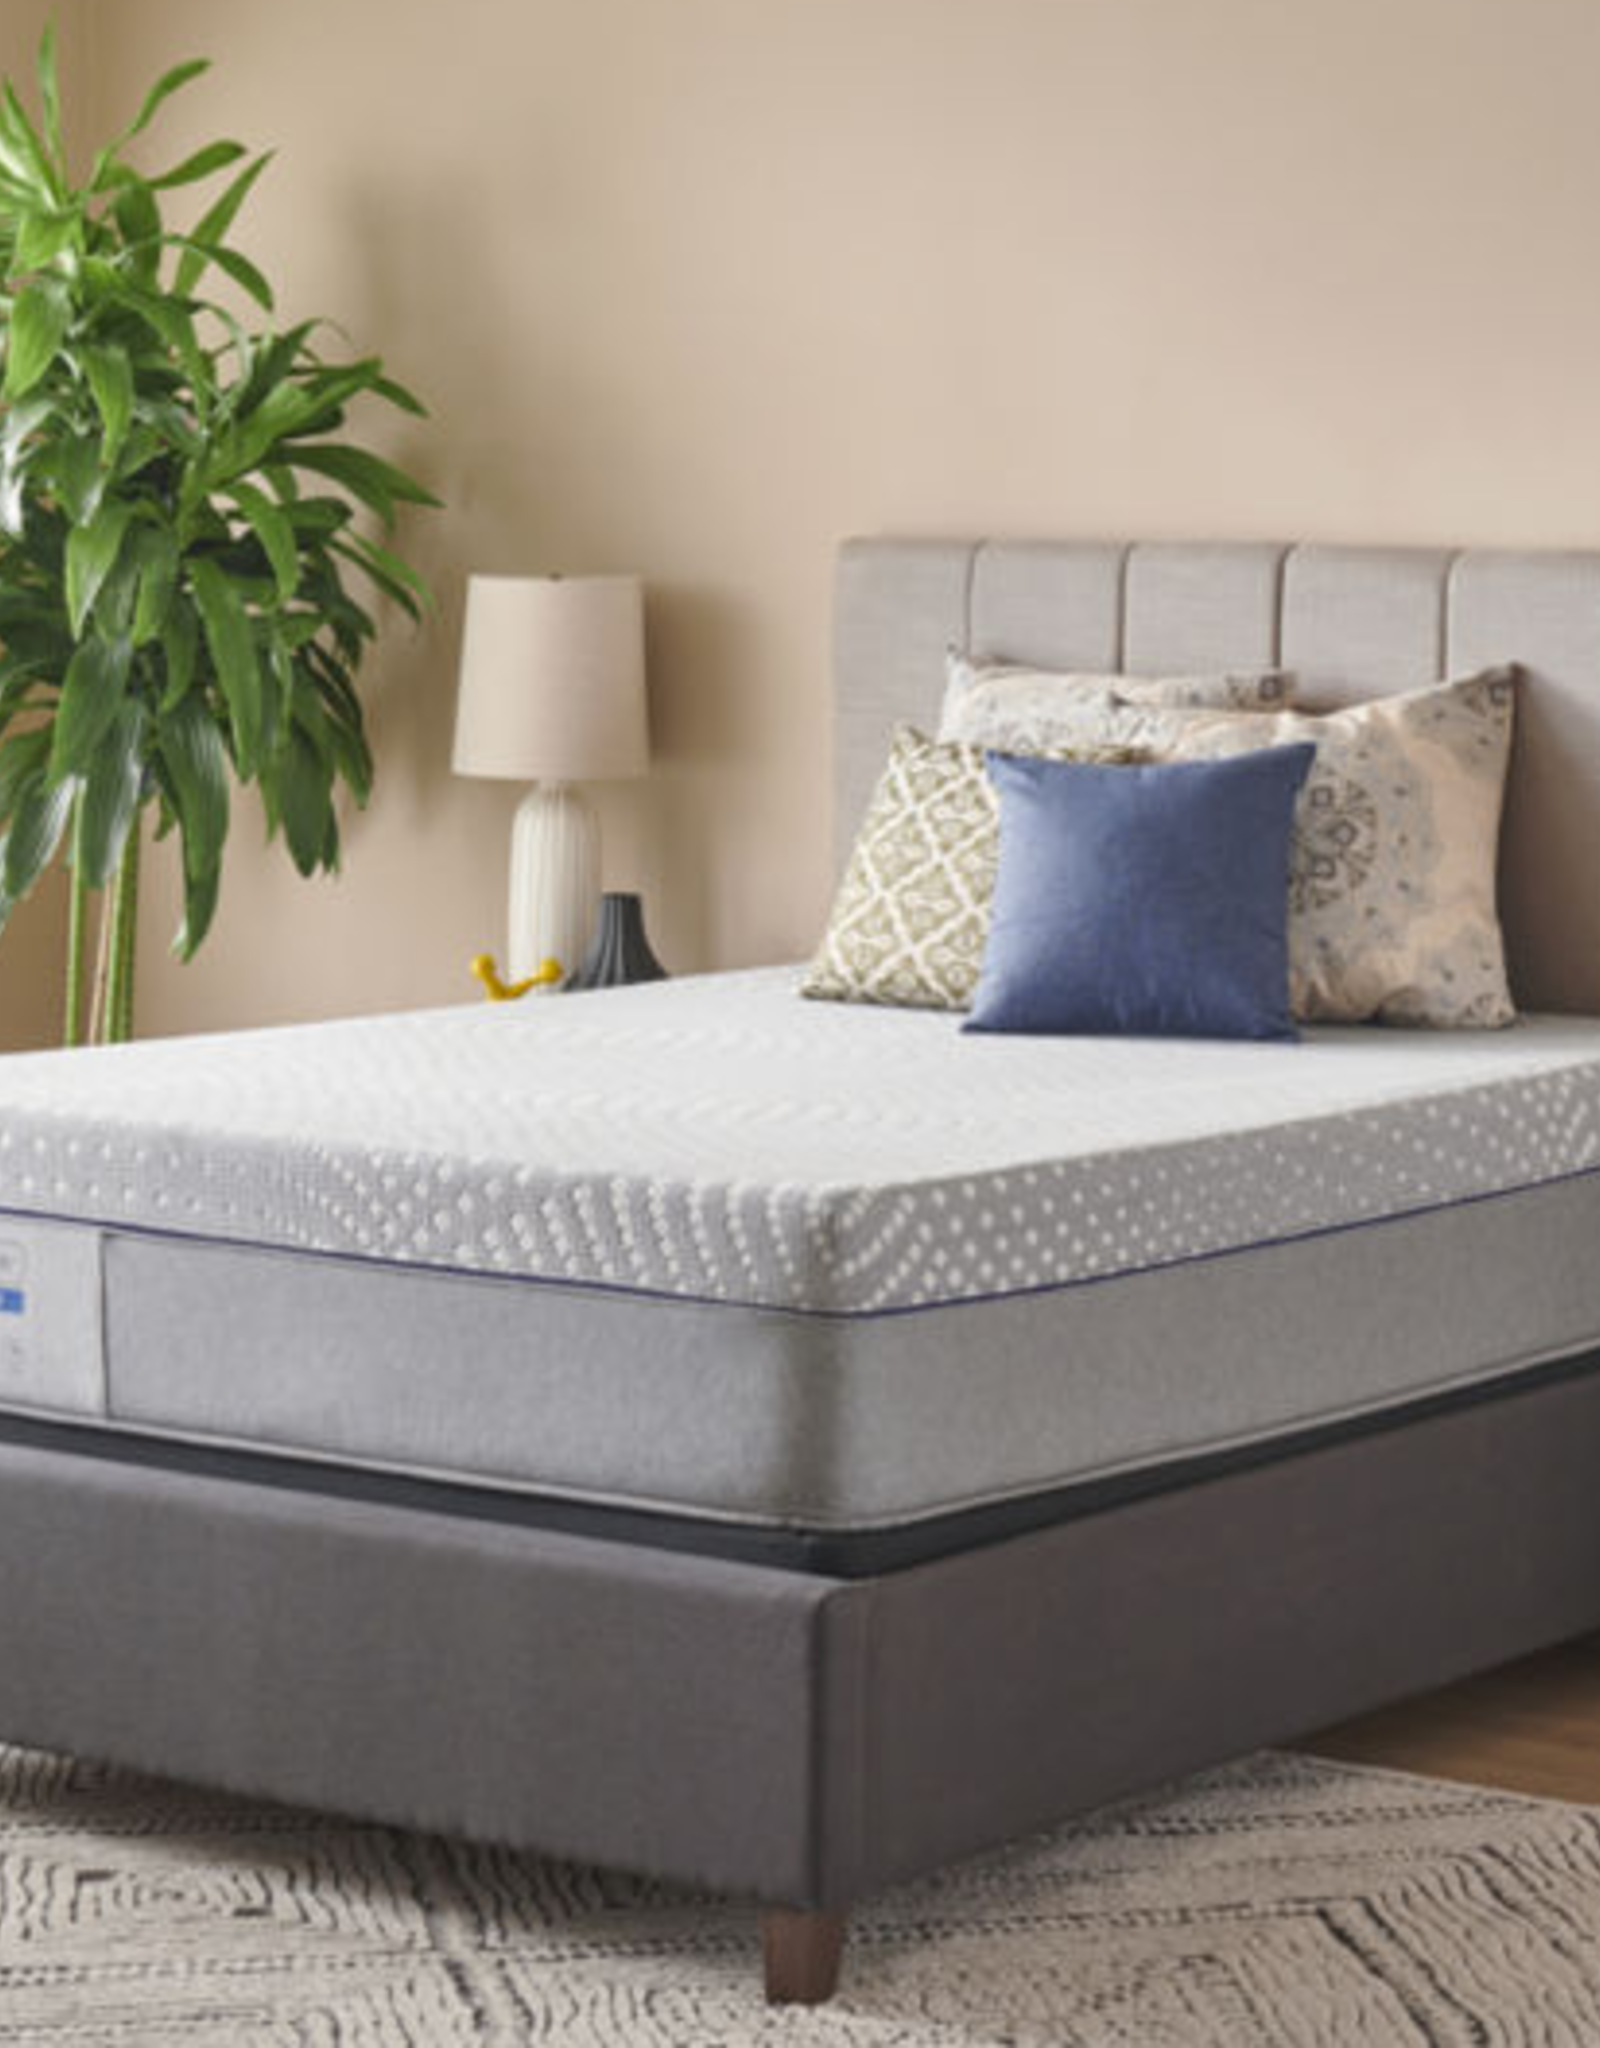 Sealy Sealy Lacey FIRM Mattress : Queen